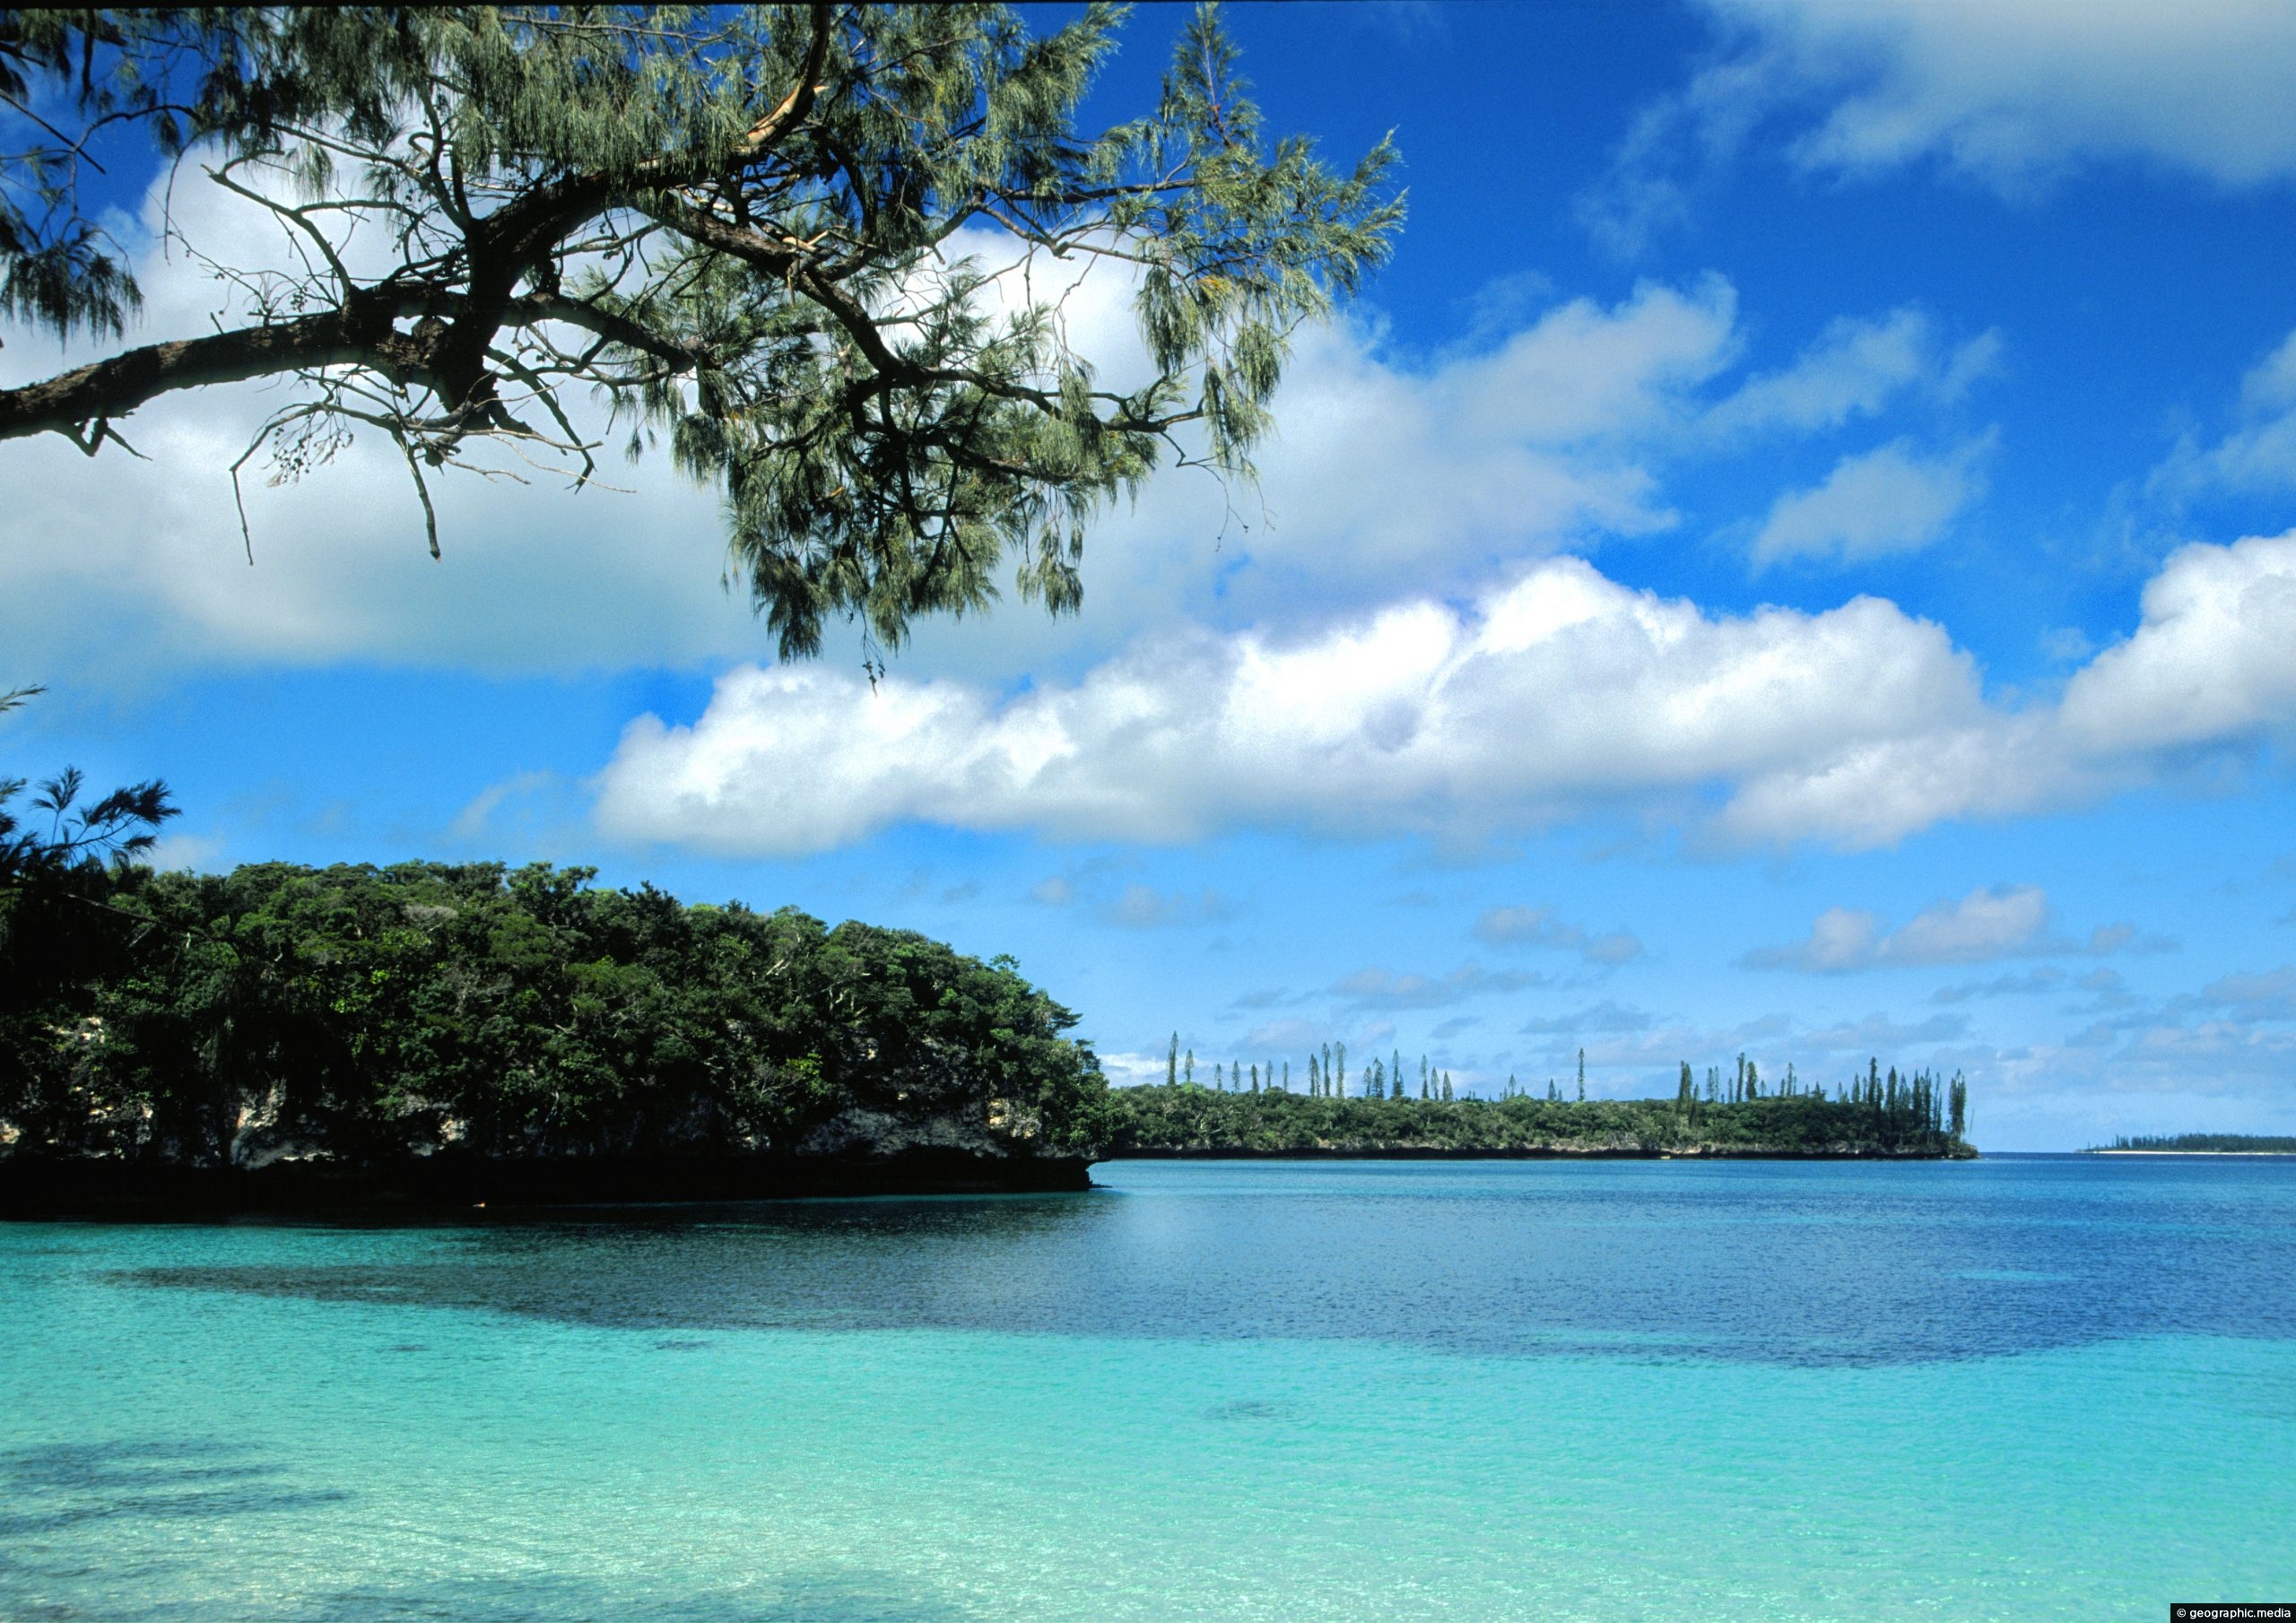 View of The Isle of Pines in New Caledonia